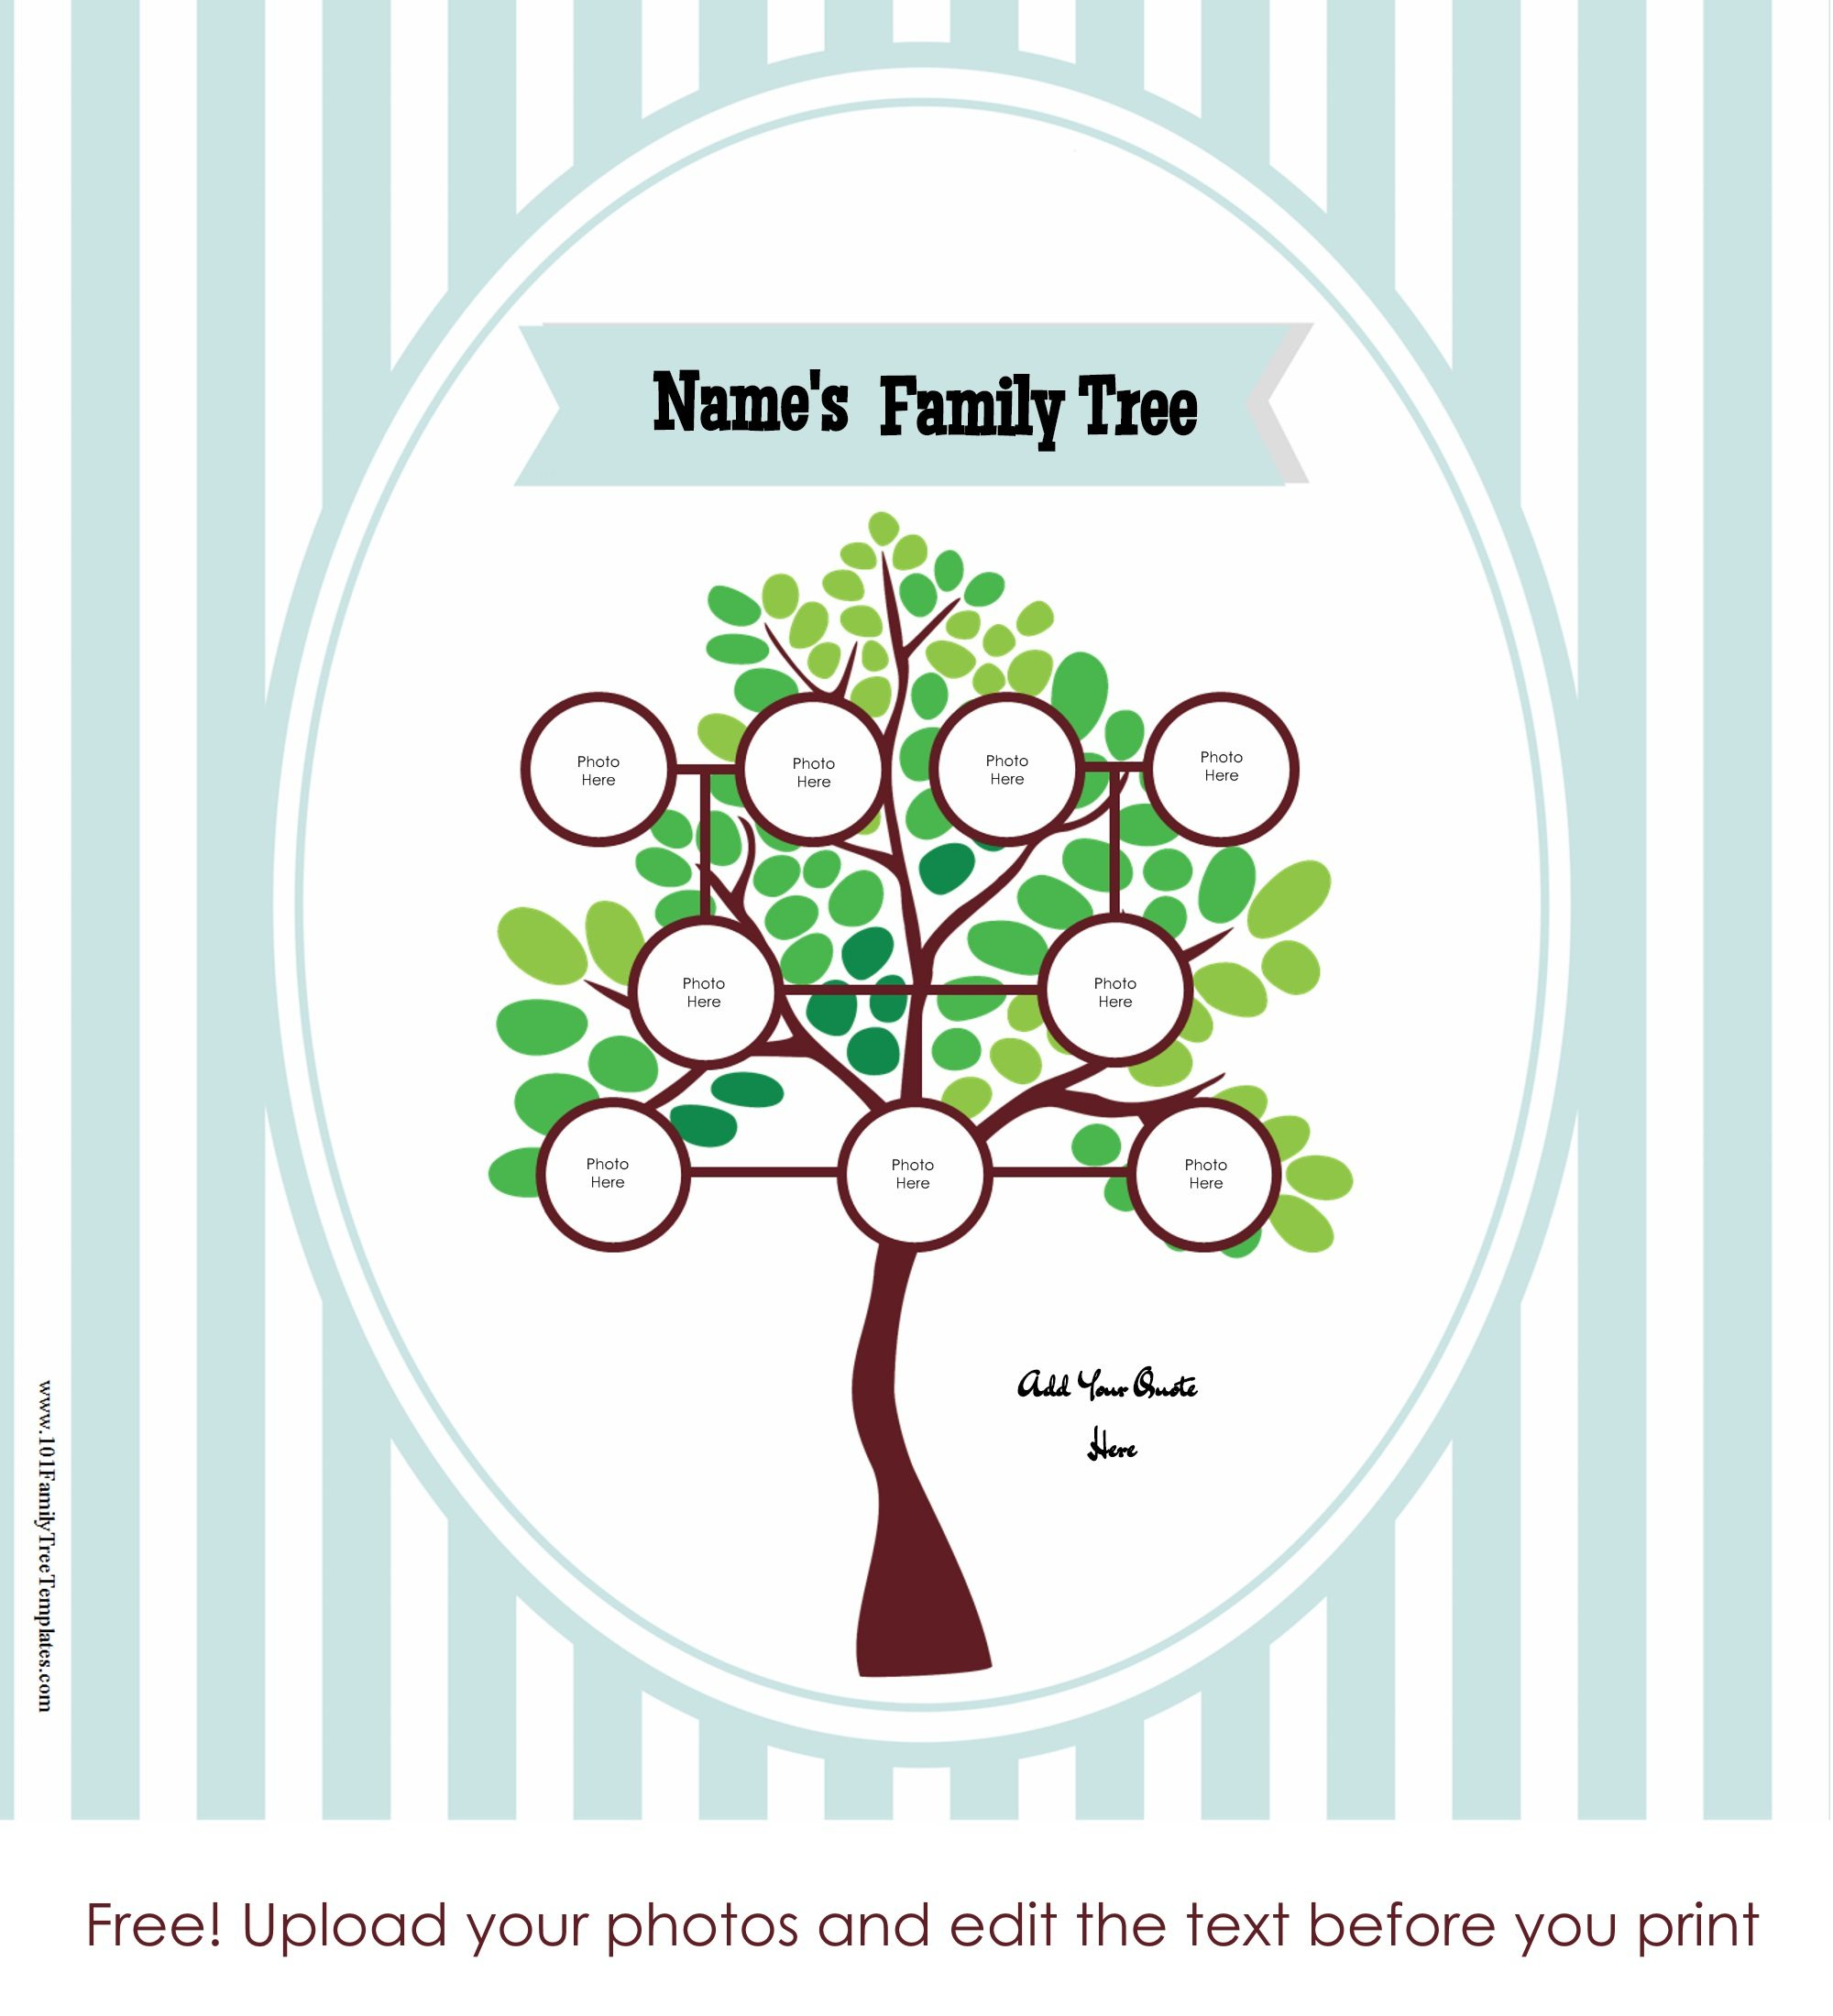 Free Family Tree Poster | Customize Online Then Print At Home - Family Tree Maker Free Printable